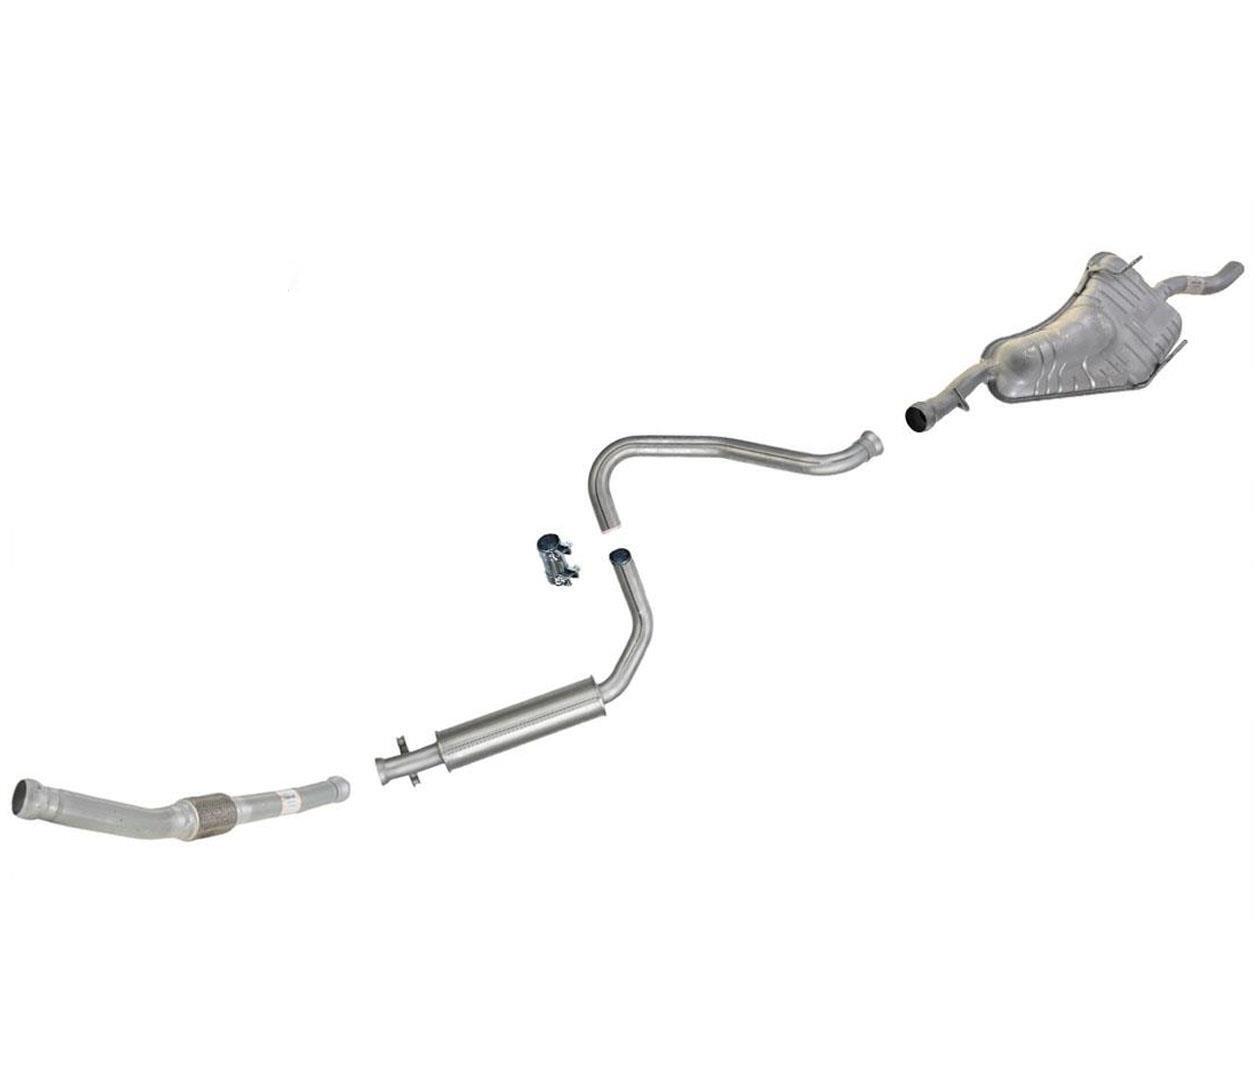 Fits 1999-2001 Saab S & SE 9-3 9 3 2.0L Turbo Exhaust System Pipe Muffler